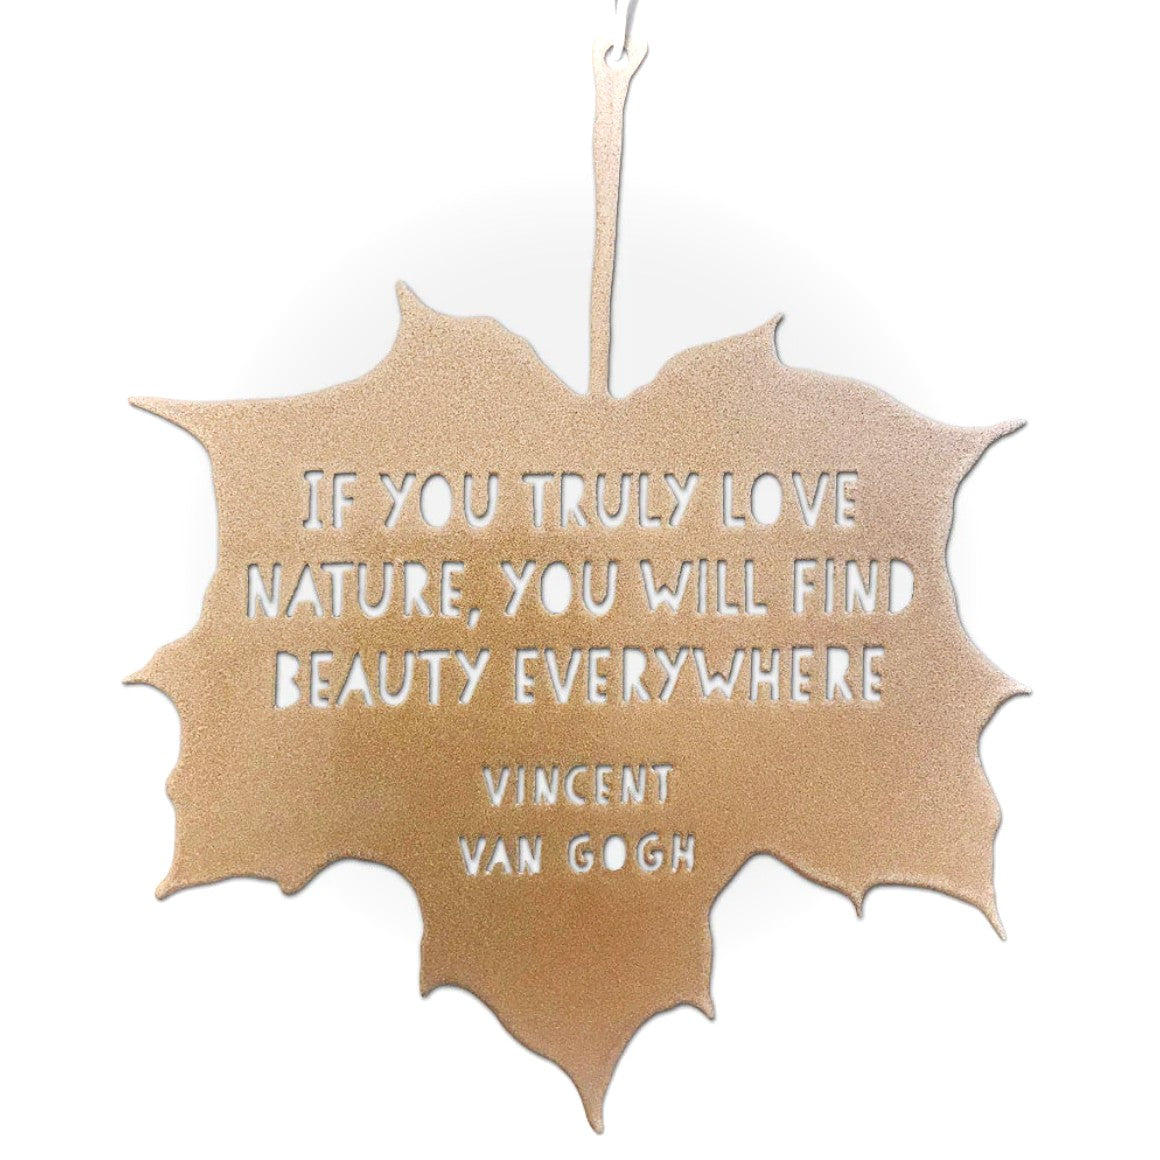 Leaf Quote - If you truly love nature you will find beauty everywhere - Vincent Van Gogh - THE BRISTOL ARTISAN